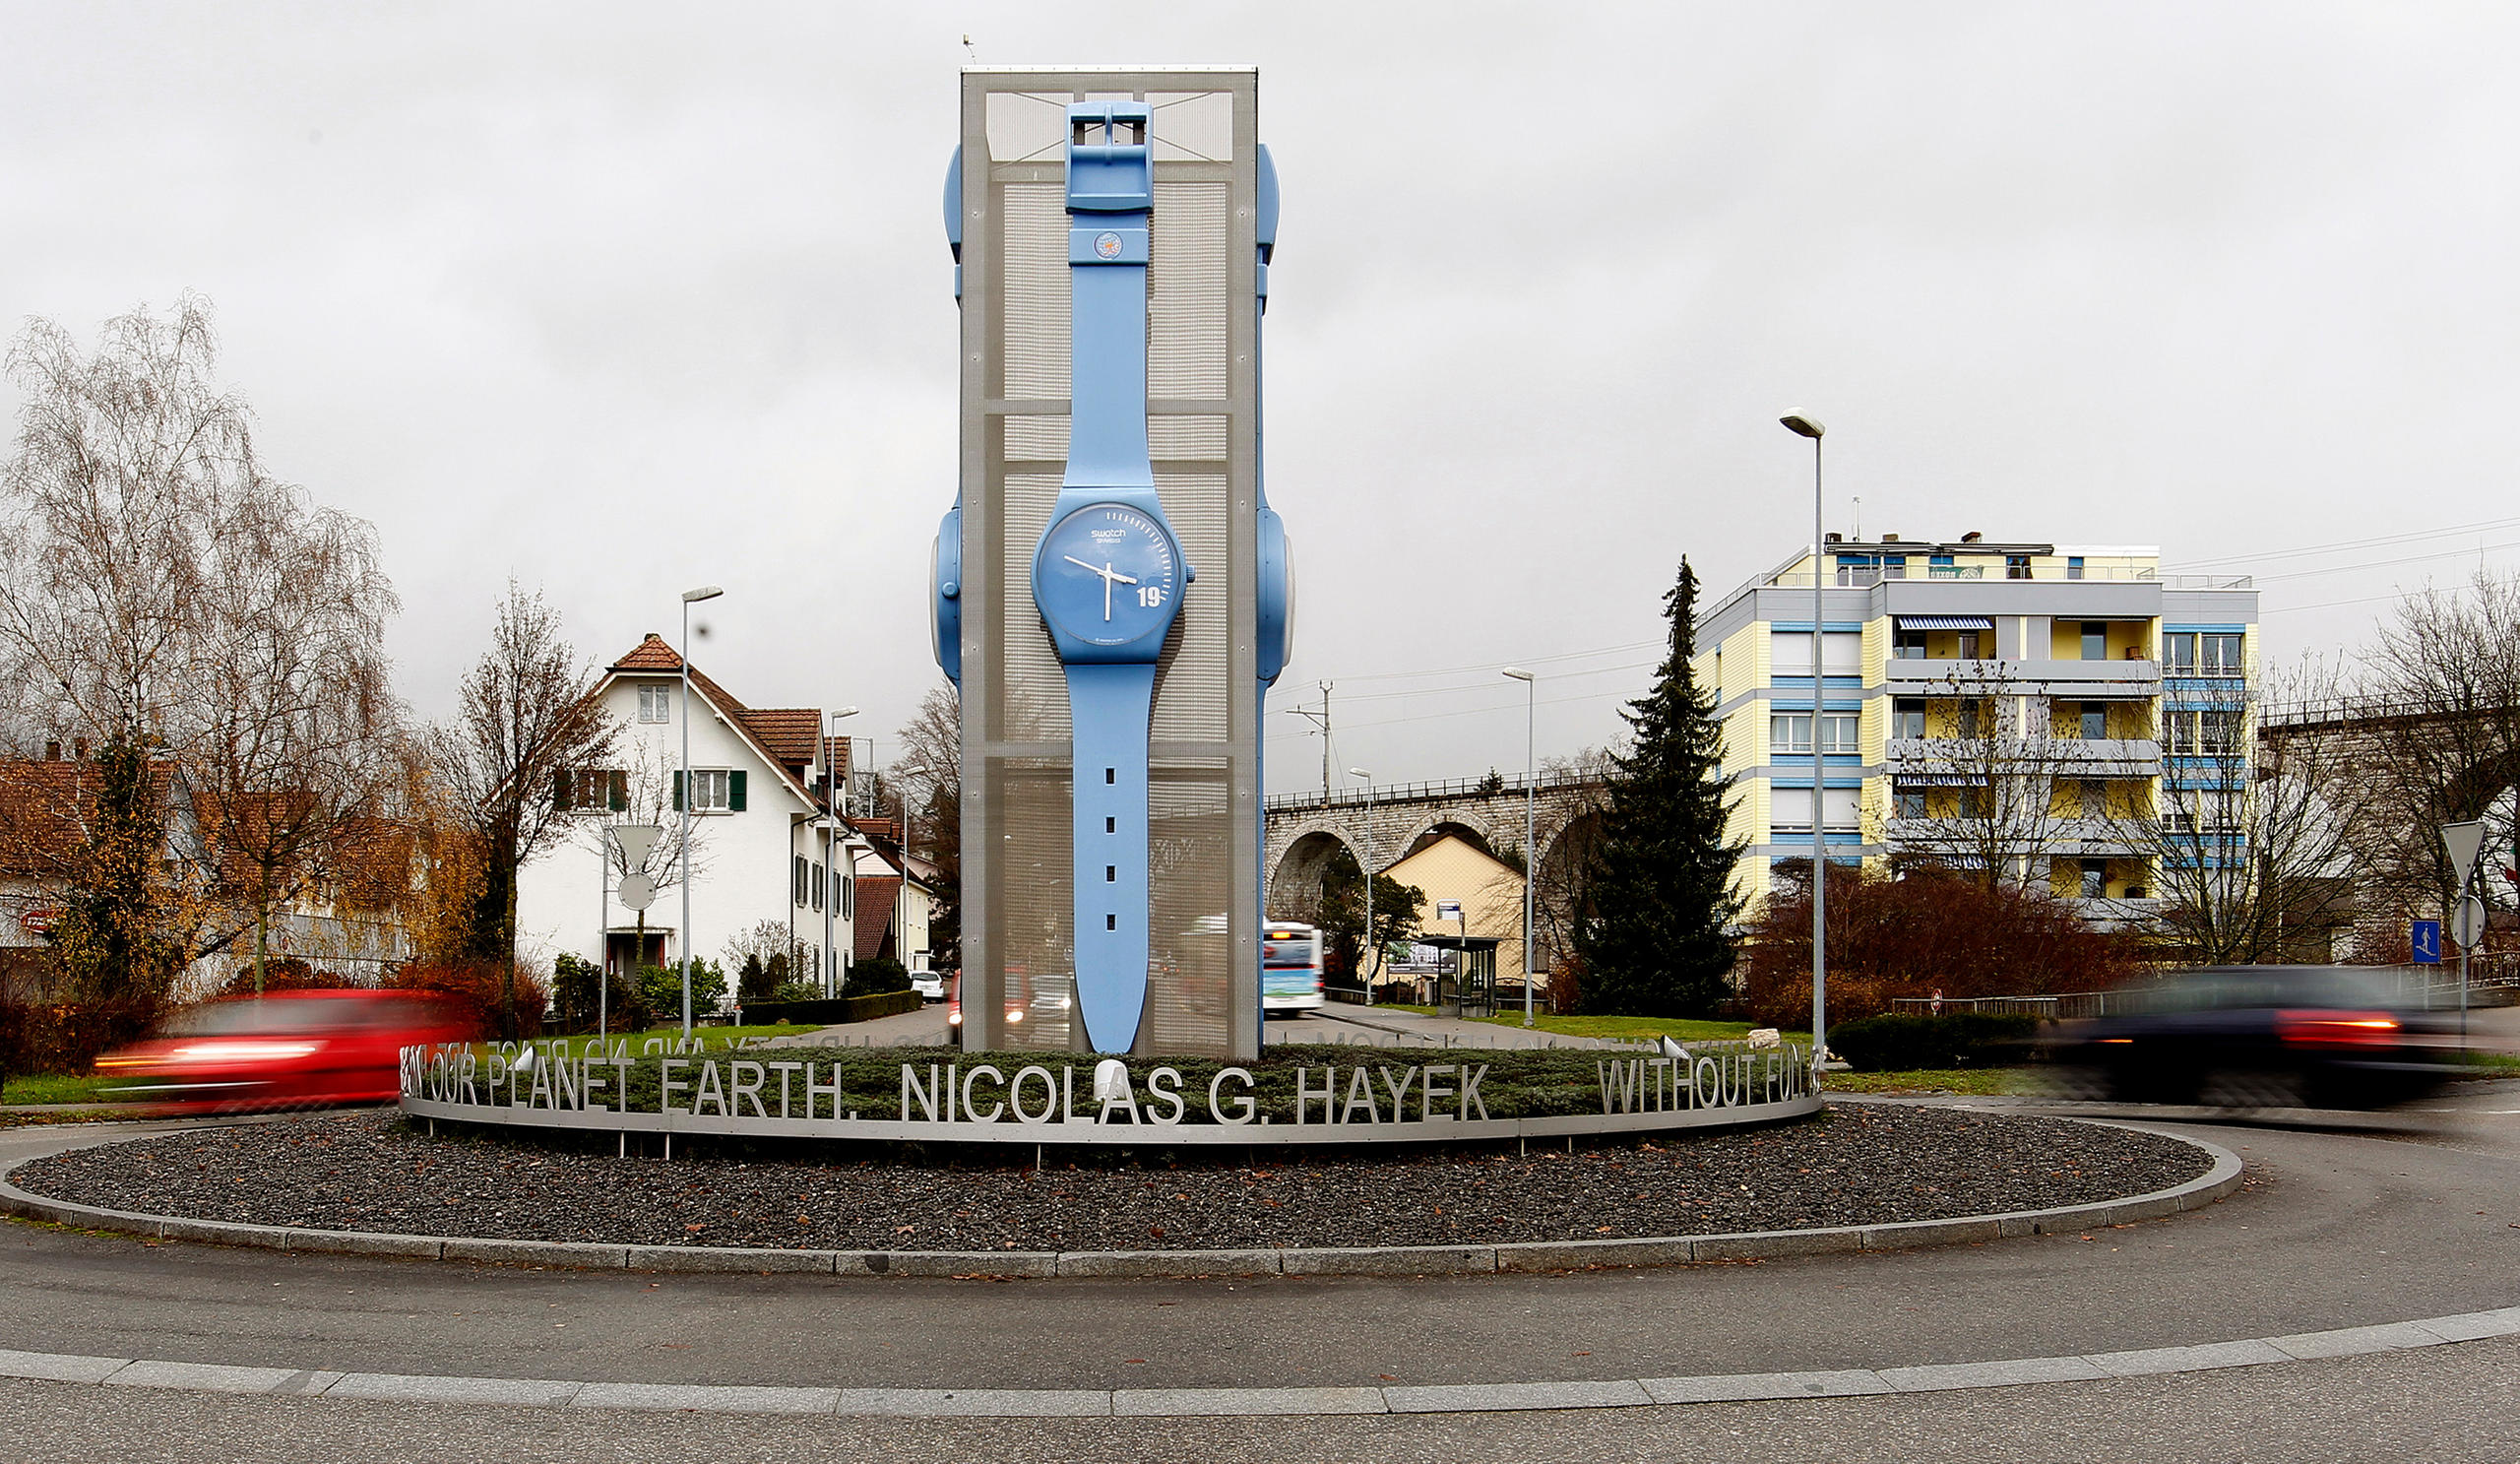 a giant Swatch watch placed in the centre of a roundabout